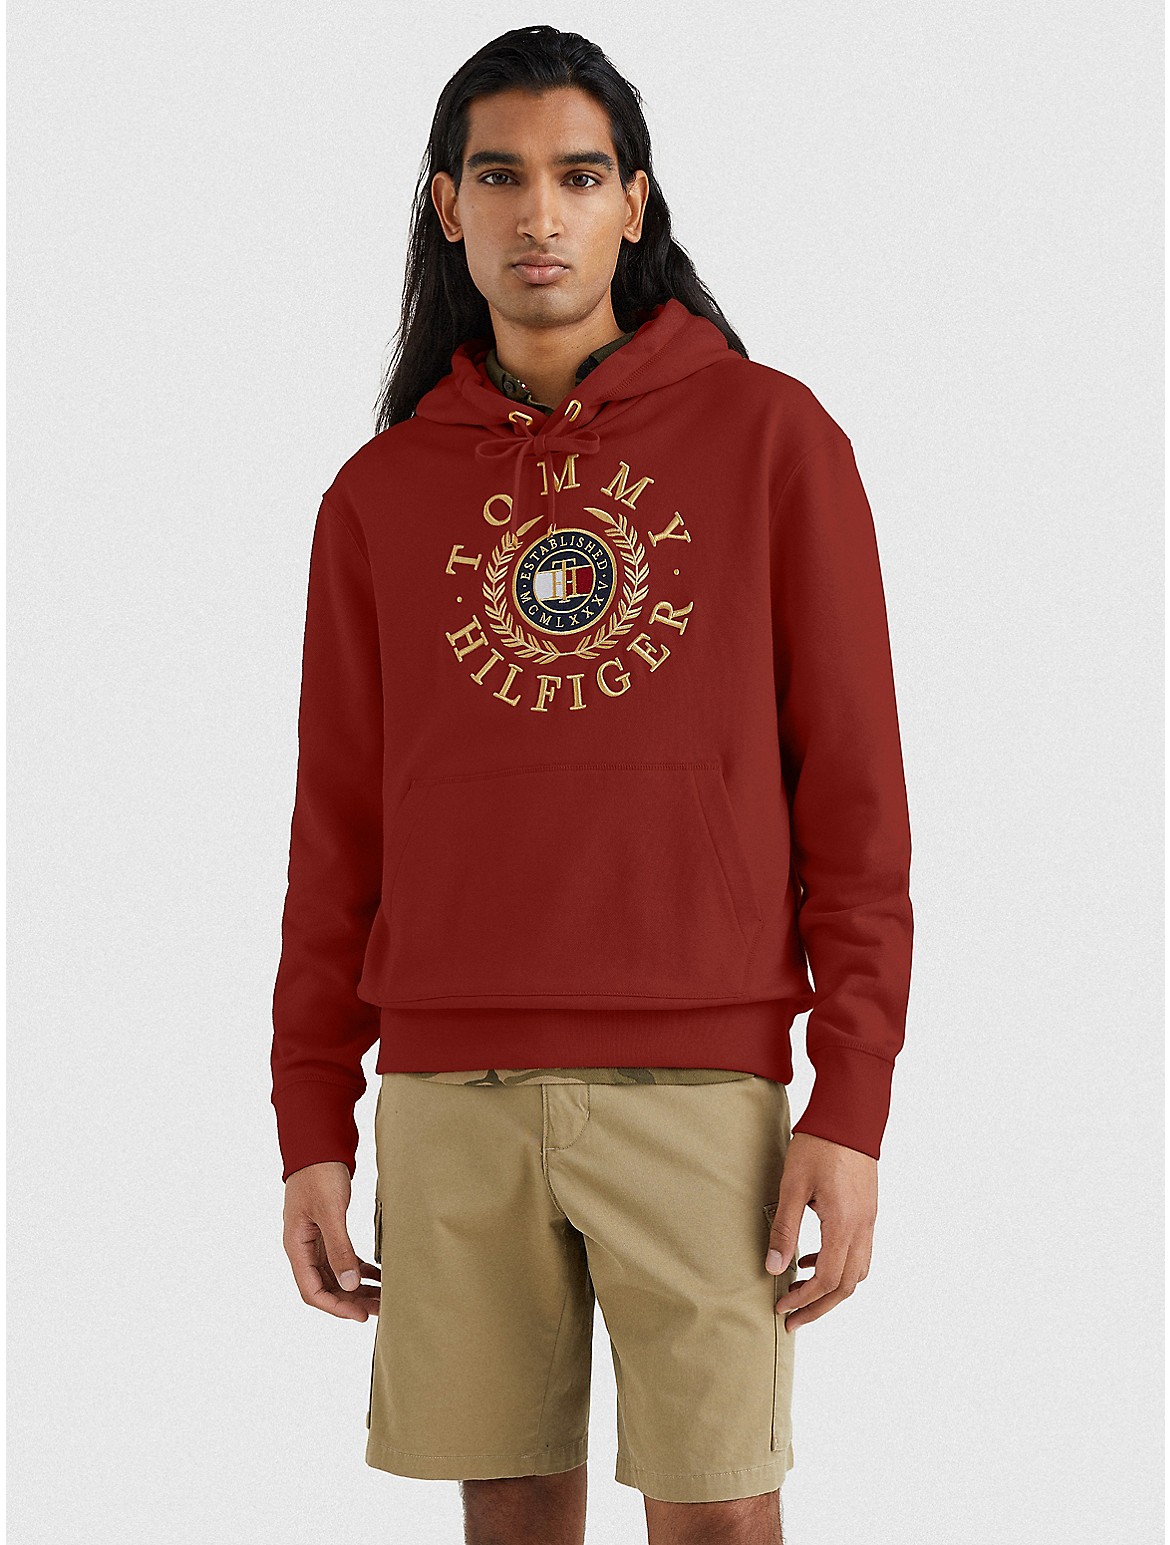 Tommy Hilfiger Men's Icon Circle Logo Hoodie - Red - XS